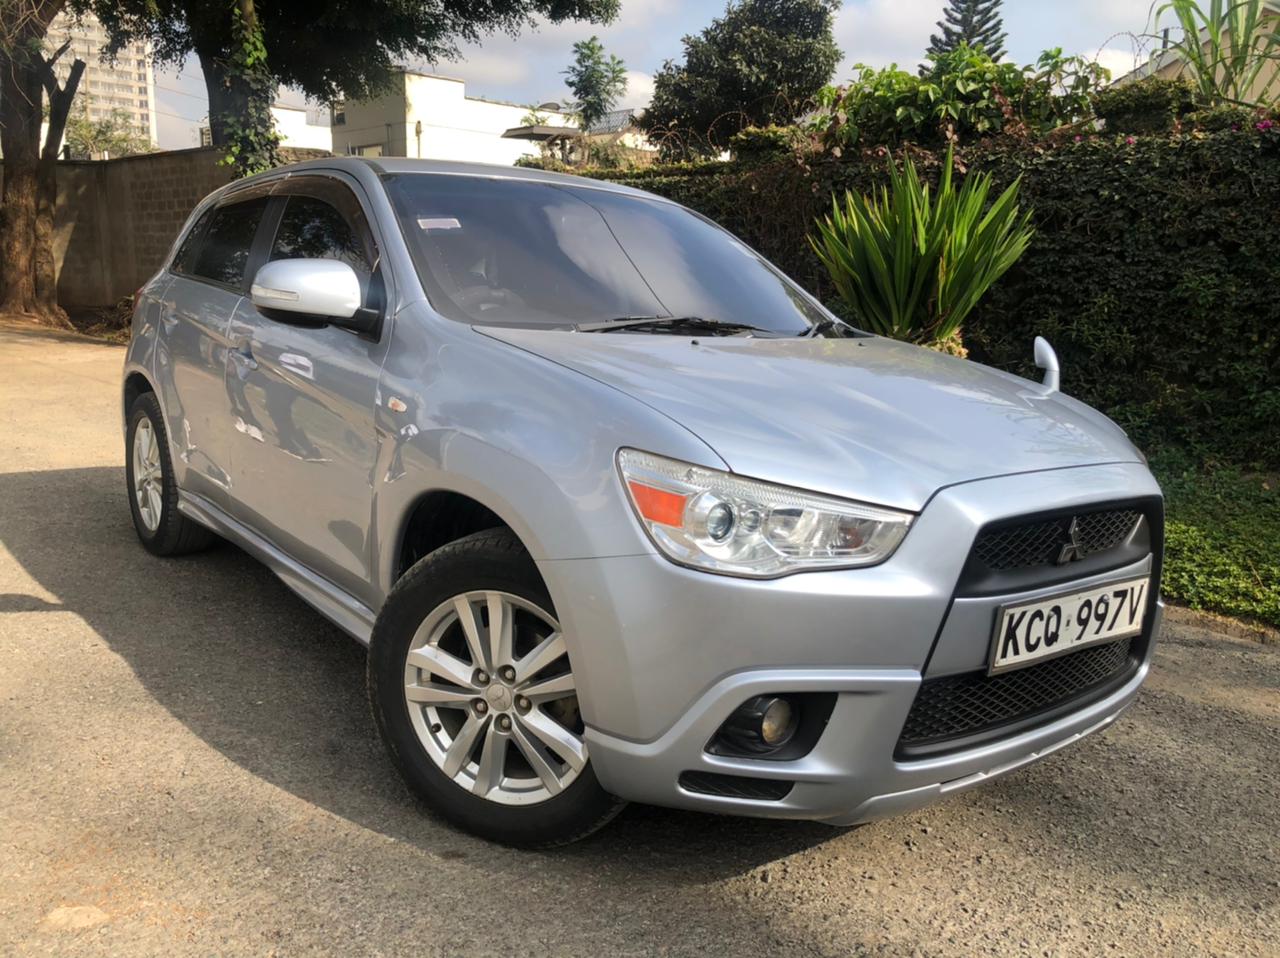 Mitsubishi RVR 2011 Pay 20% 80% in 60 Monthly Installments As New